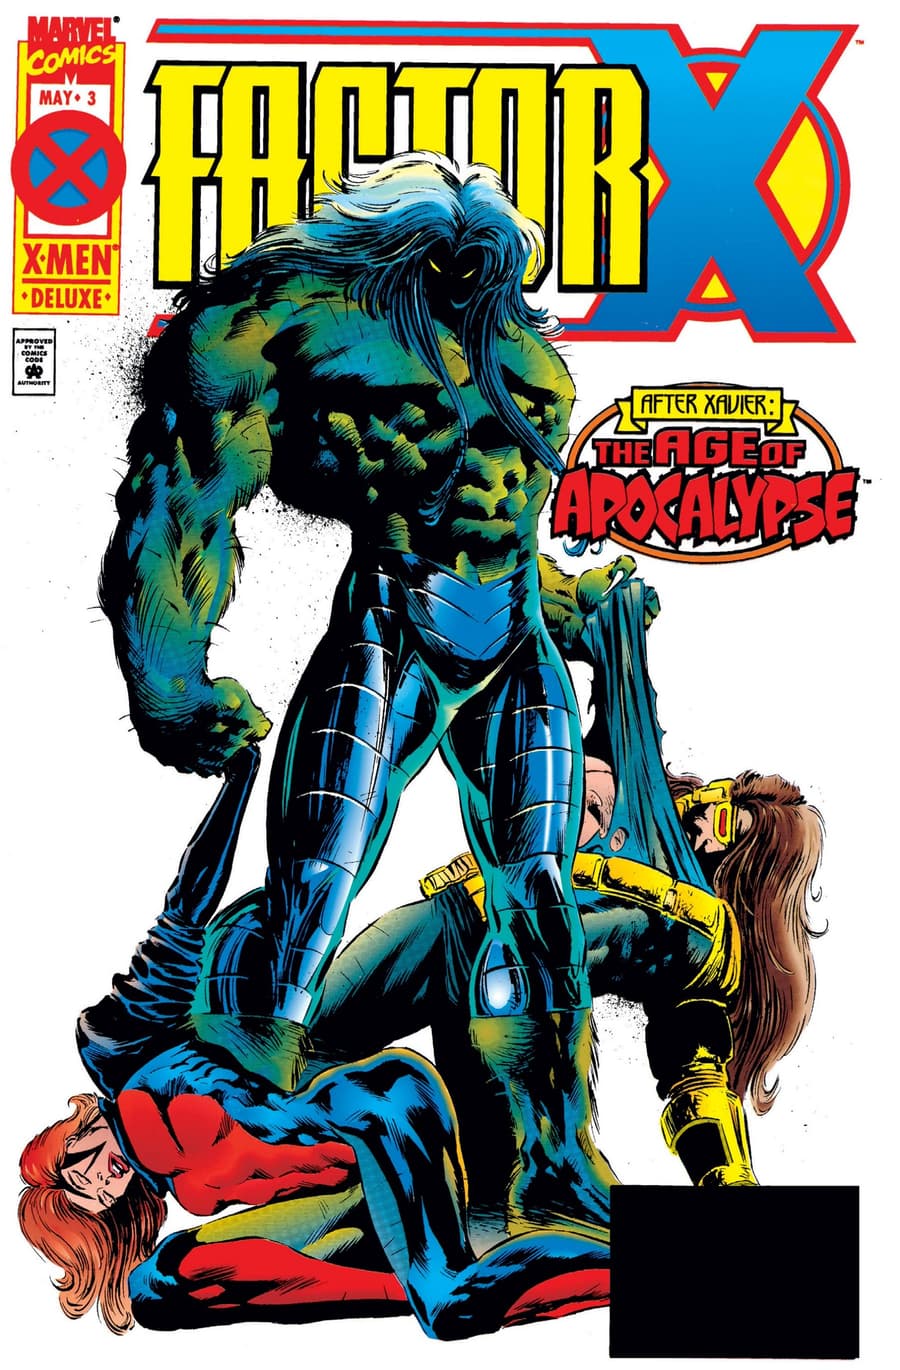 The cover to FACTOR X (1995) #3.